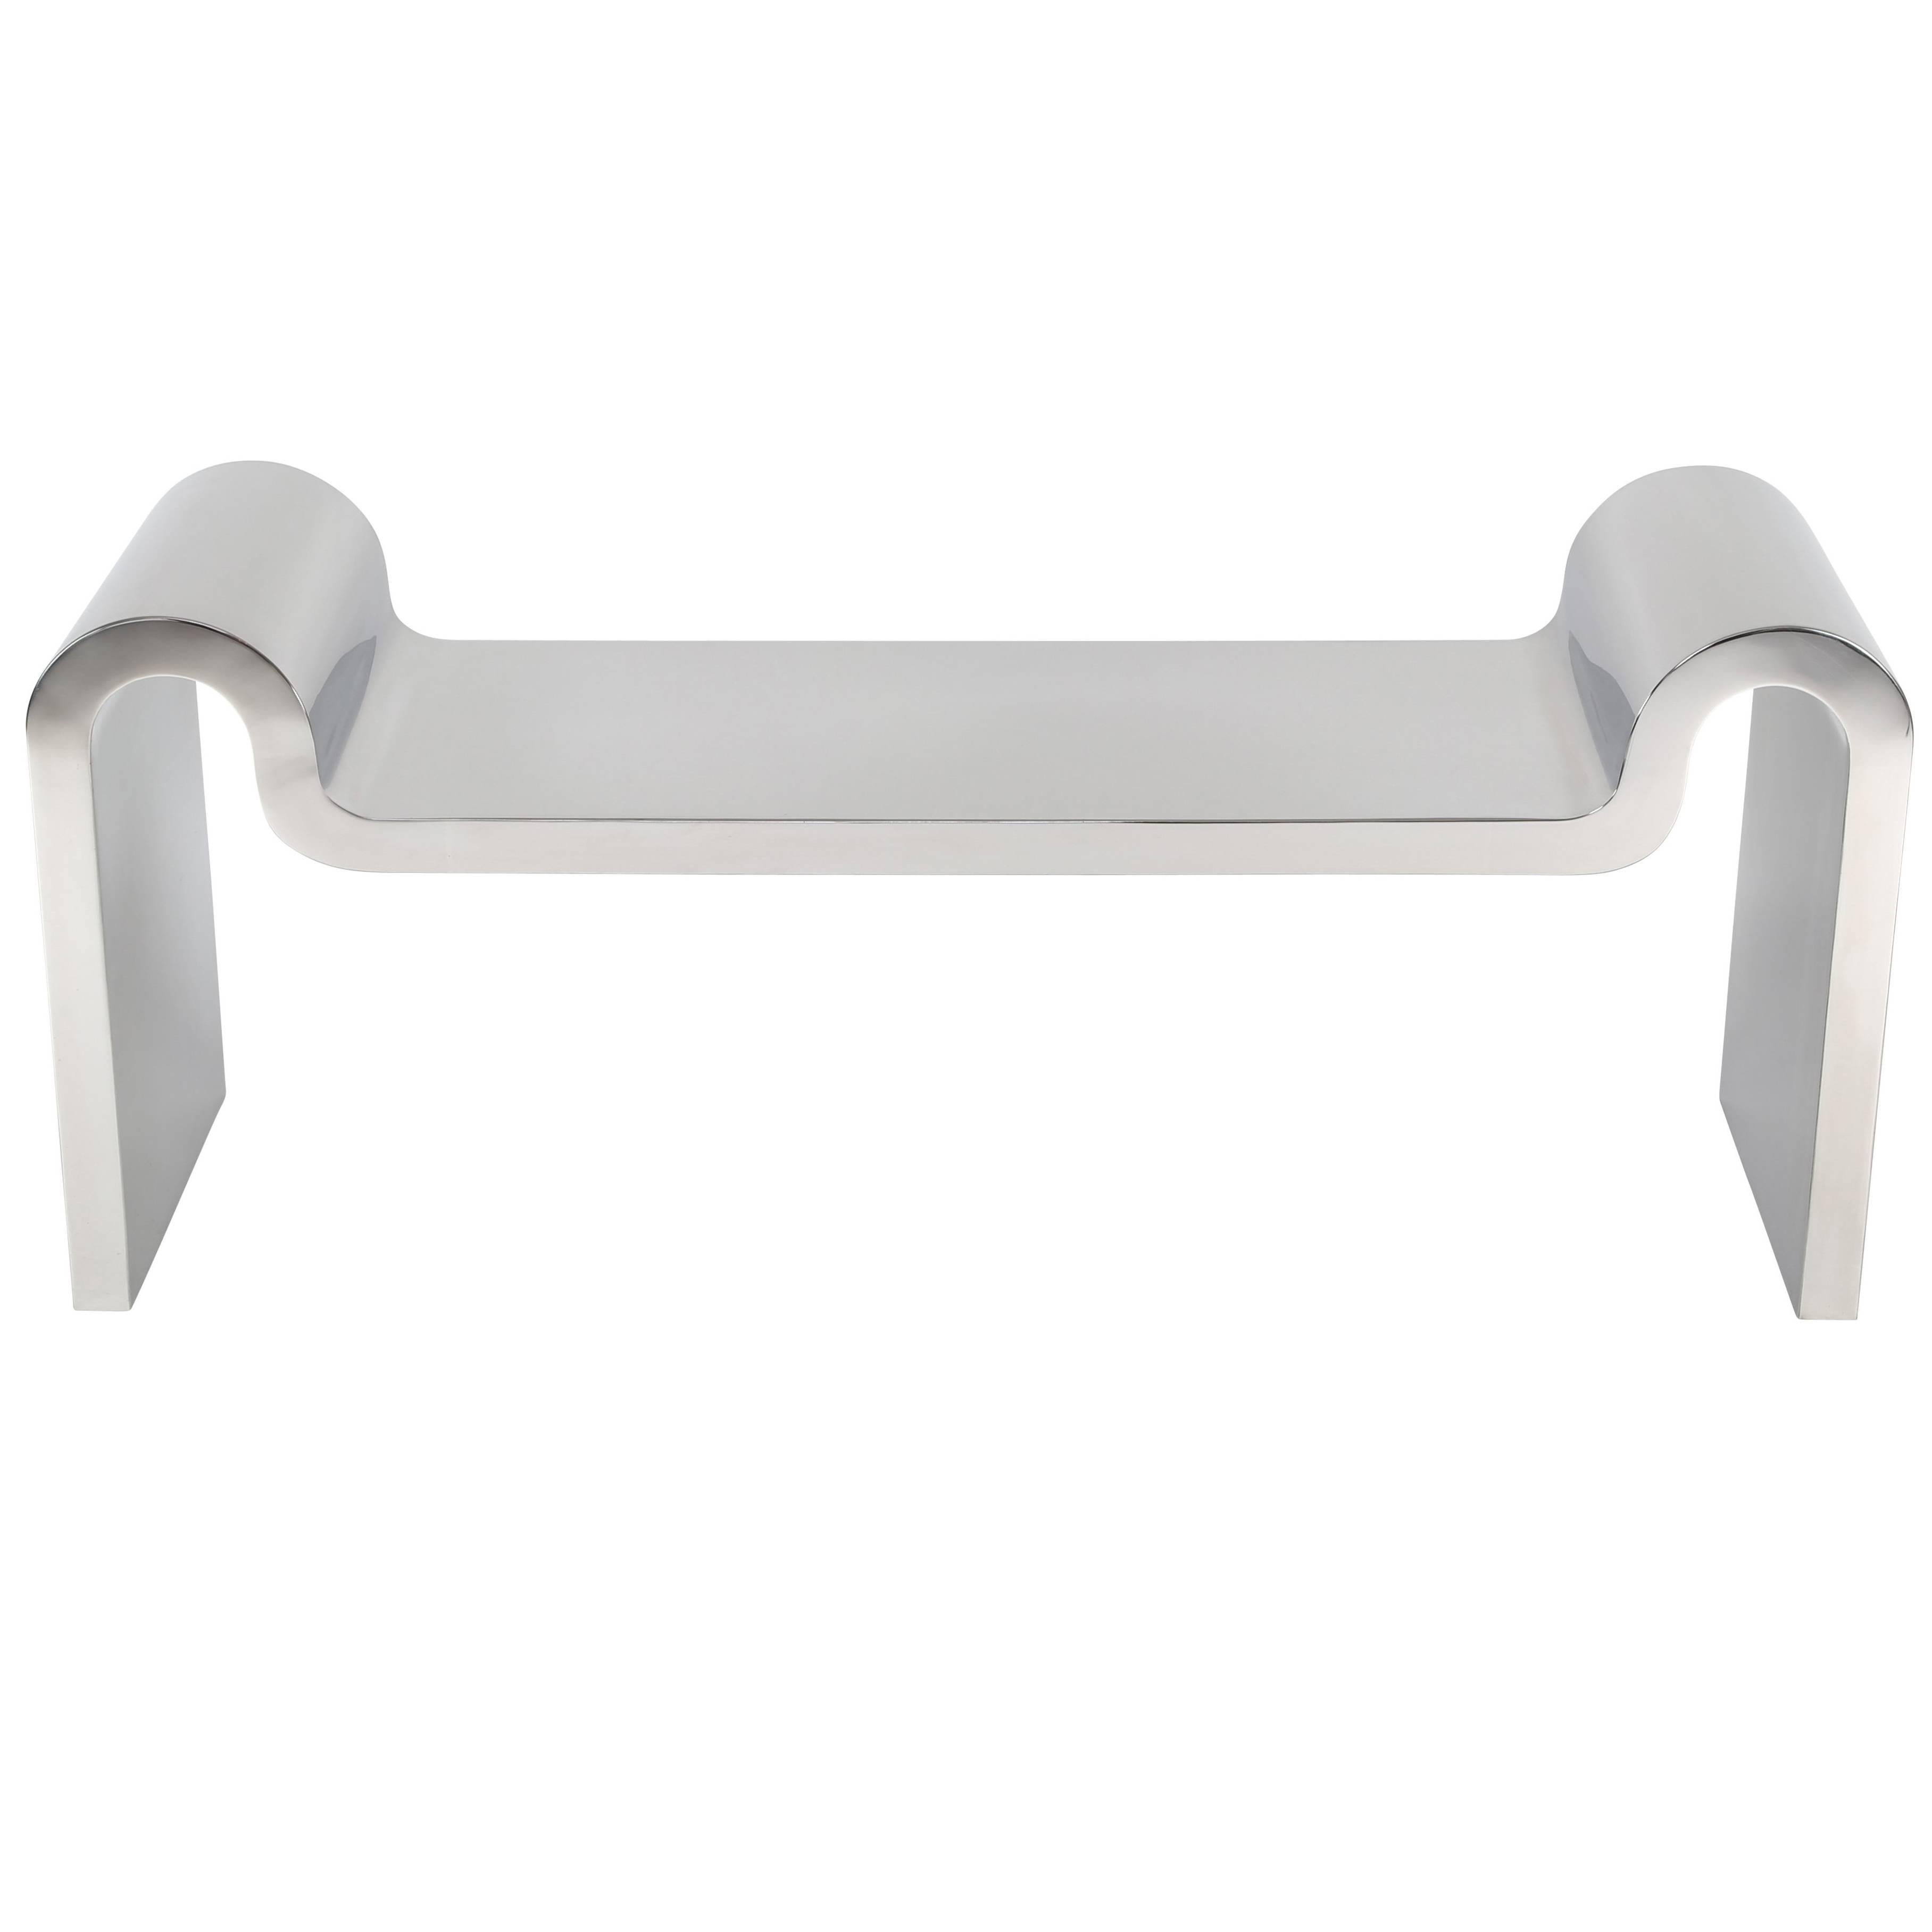 Rare Karl Springer "Sculpture" Bench in Polished Stainless Steel, circa 1990